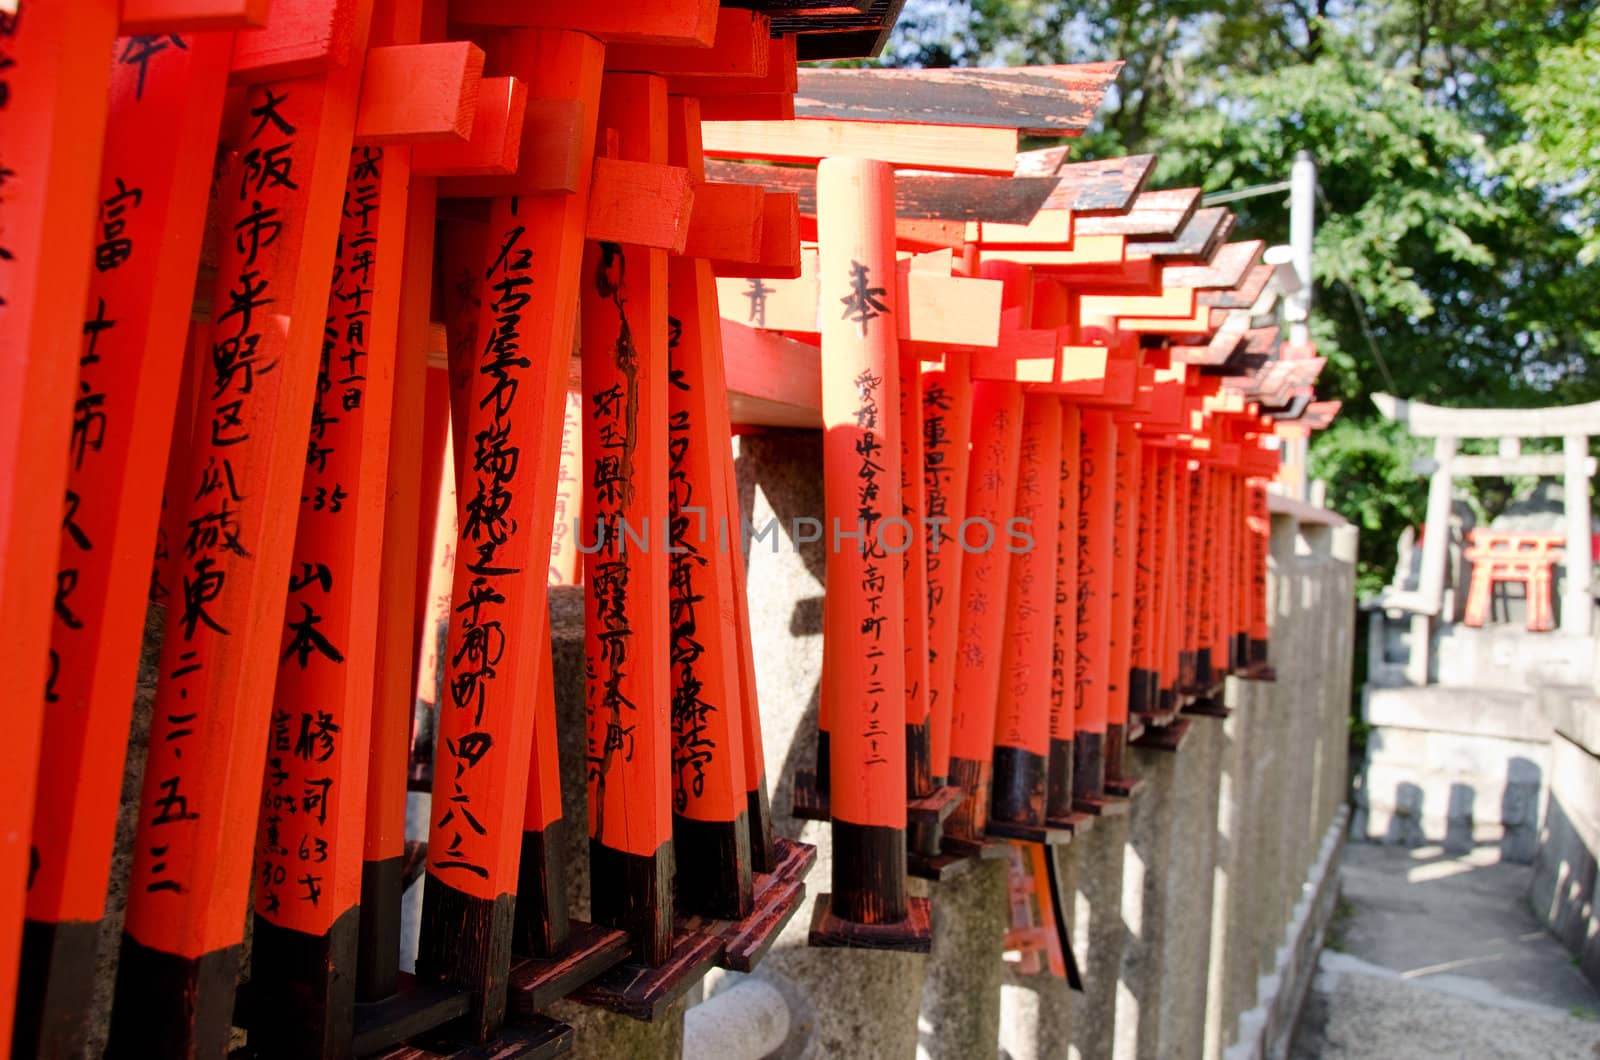 Small torii gates at a shrine in Kyoto by Arrxxx